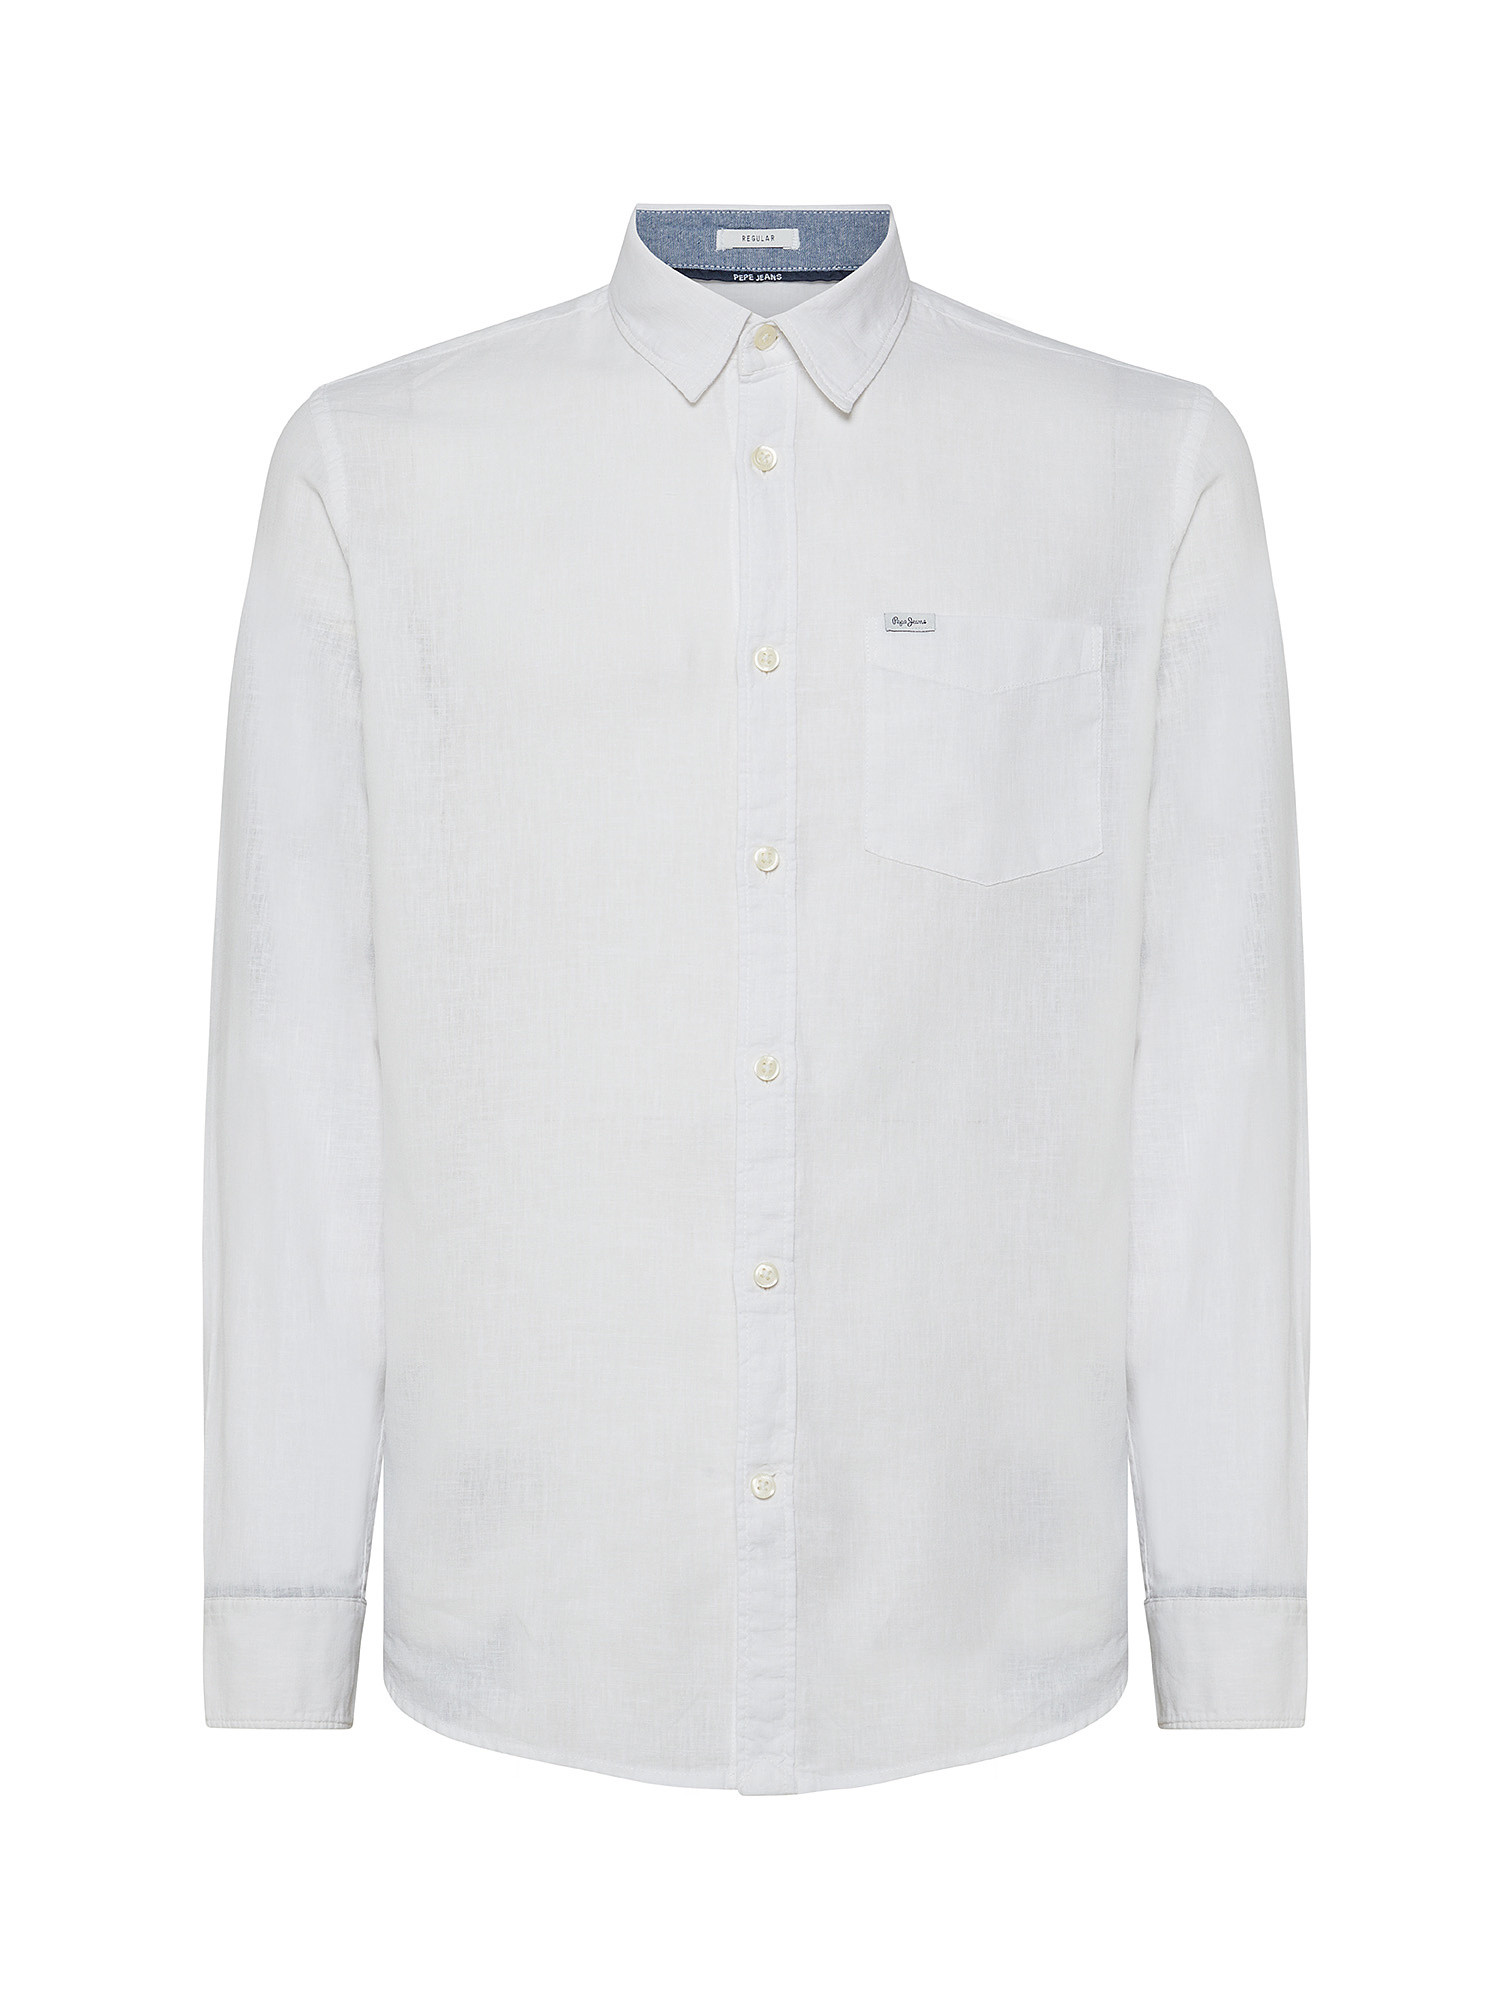 Pepe Jeans - Linen blend shirt, White, large image number 1